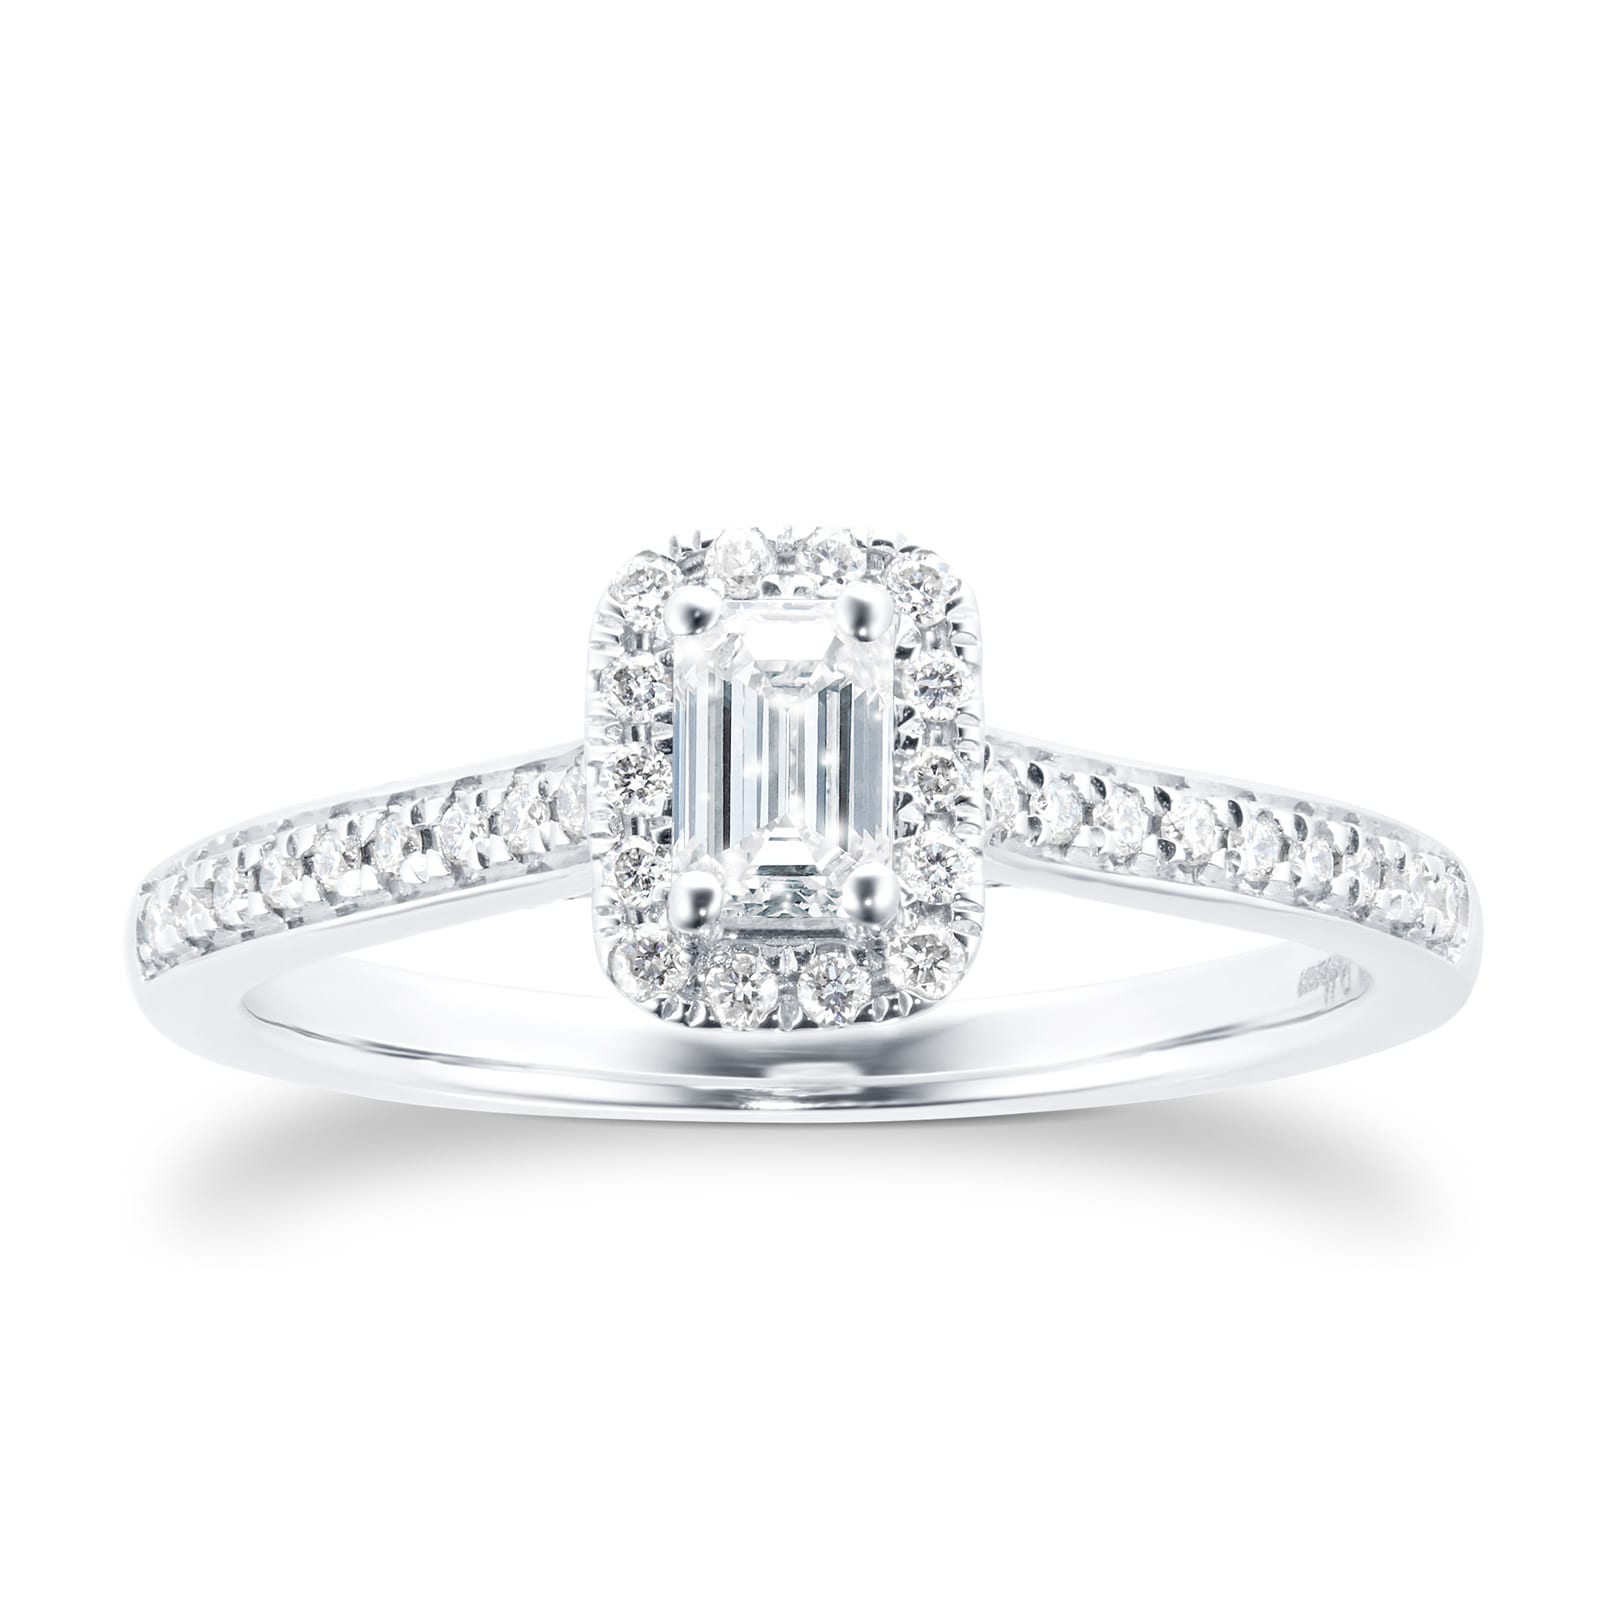 Emerald Cut 0.50ct Halo Diamond Ring In 18ct White Gold - Ring Size J